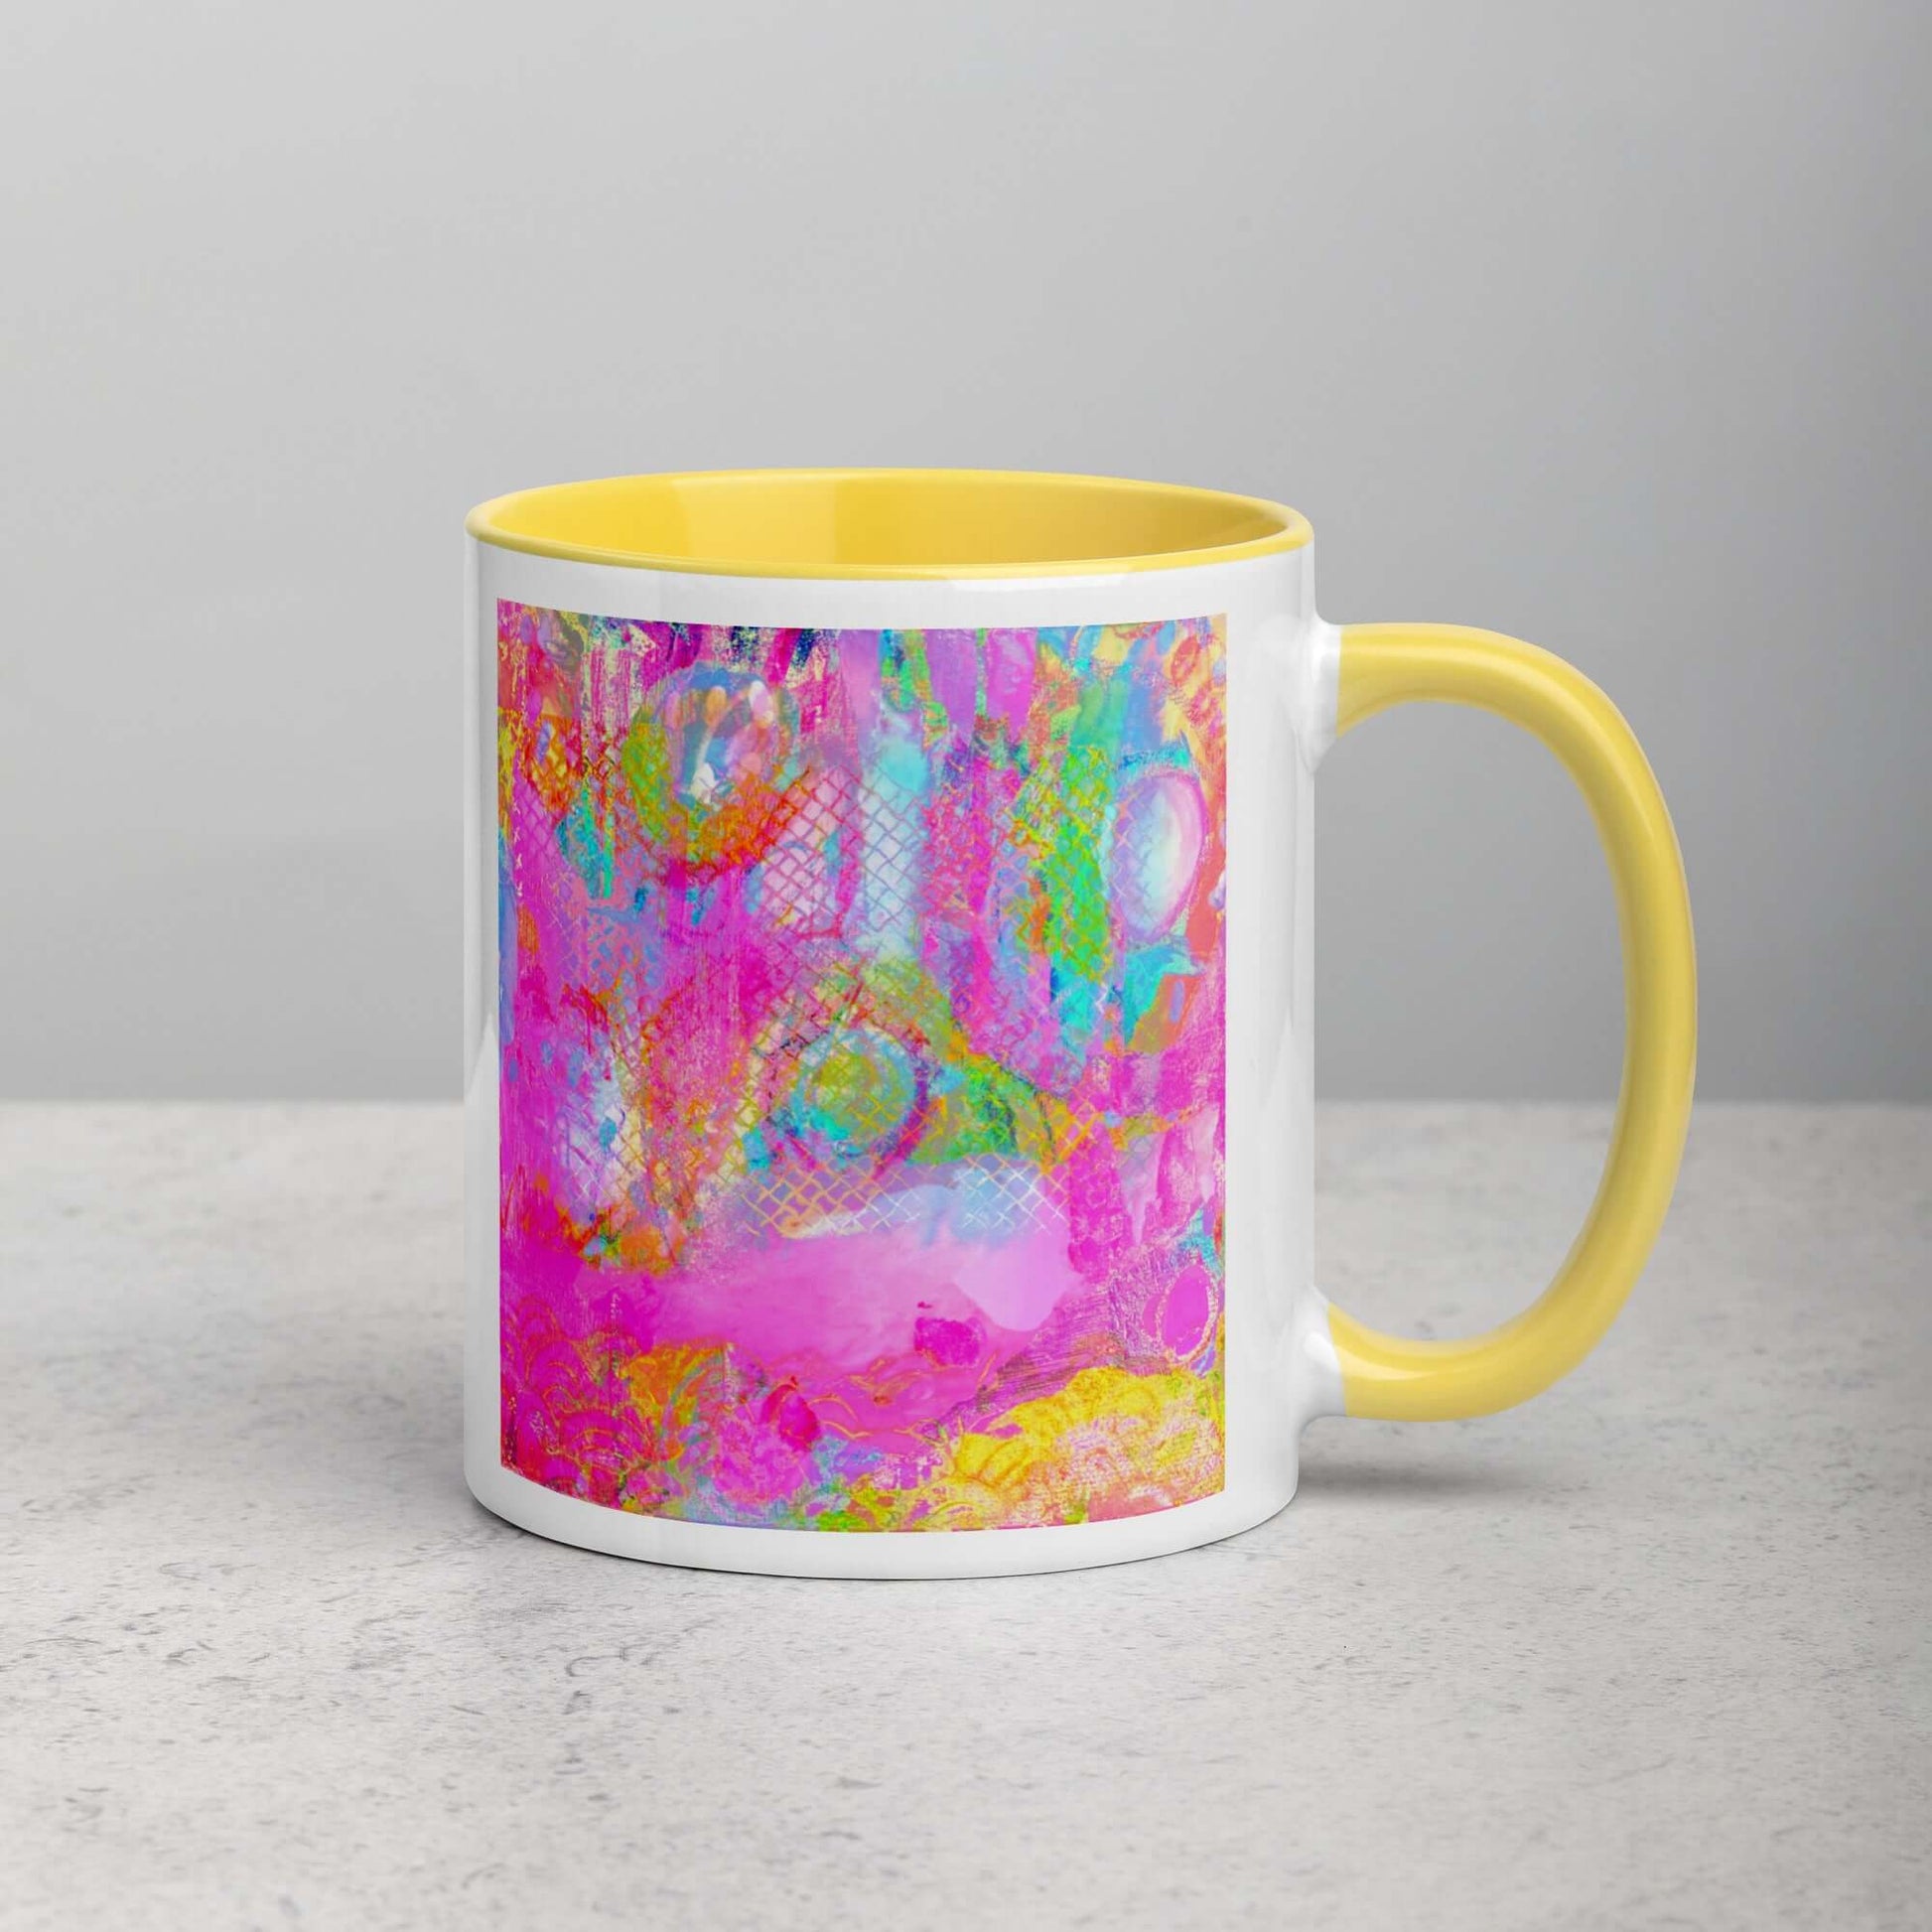  Drippy Pink “Candyland” Abstract Art Mug with Bright Yellow Color Inside Right Handed Front View